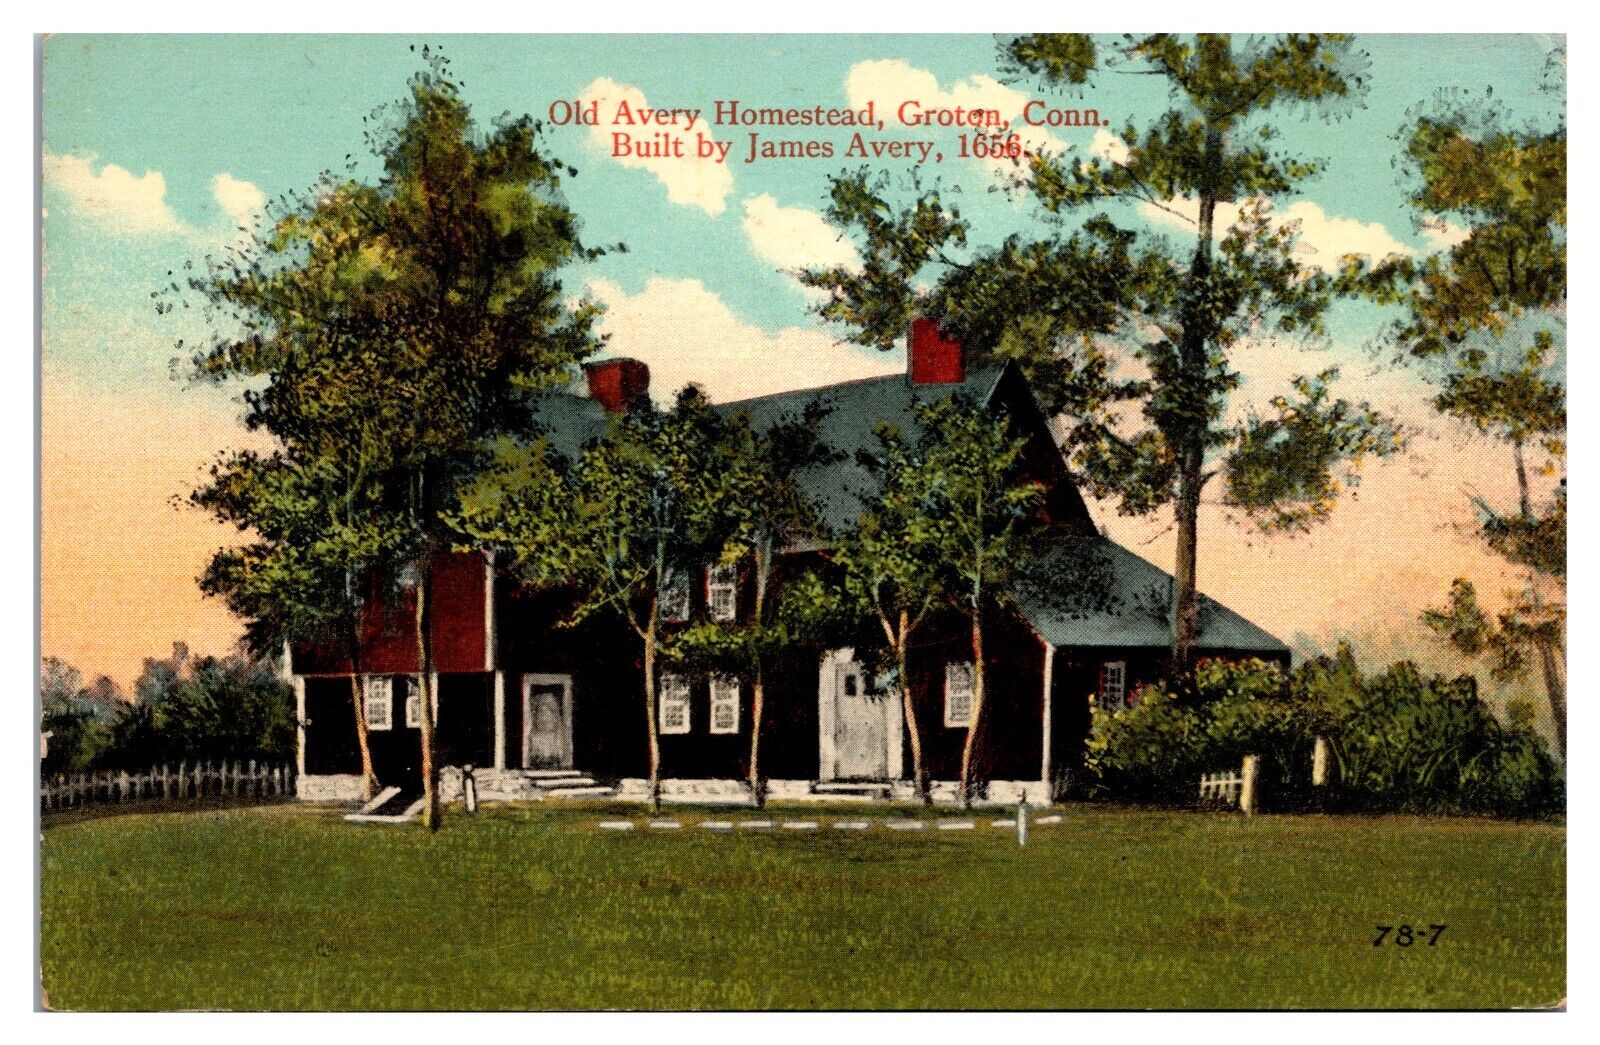 Antique Old Avery Homestead, Built by James Avery 1656, Groton, CT Postcard